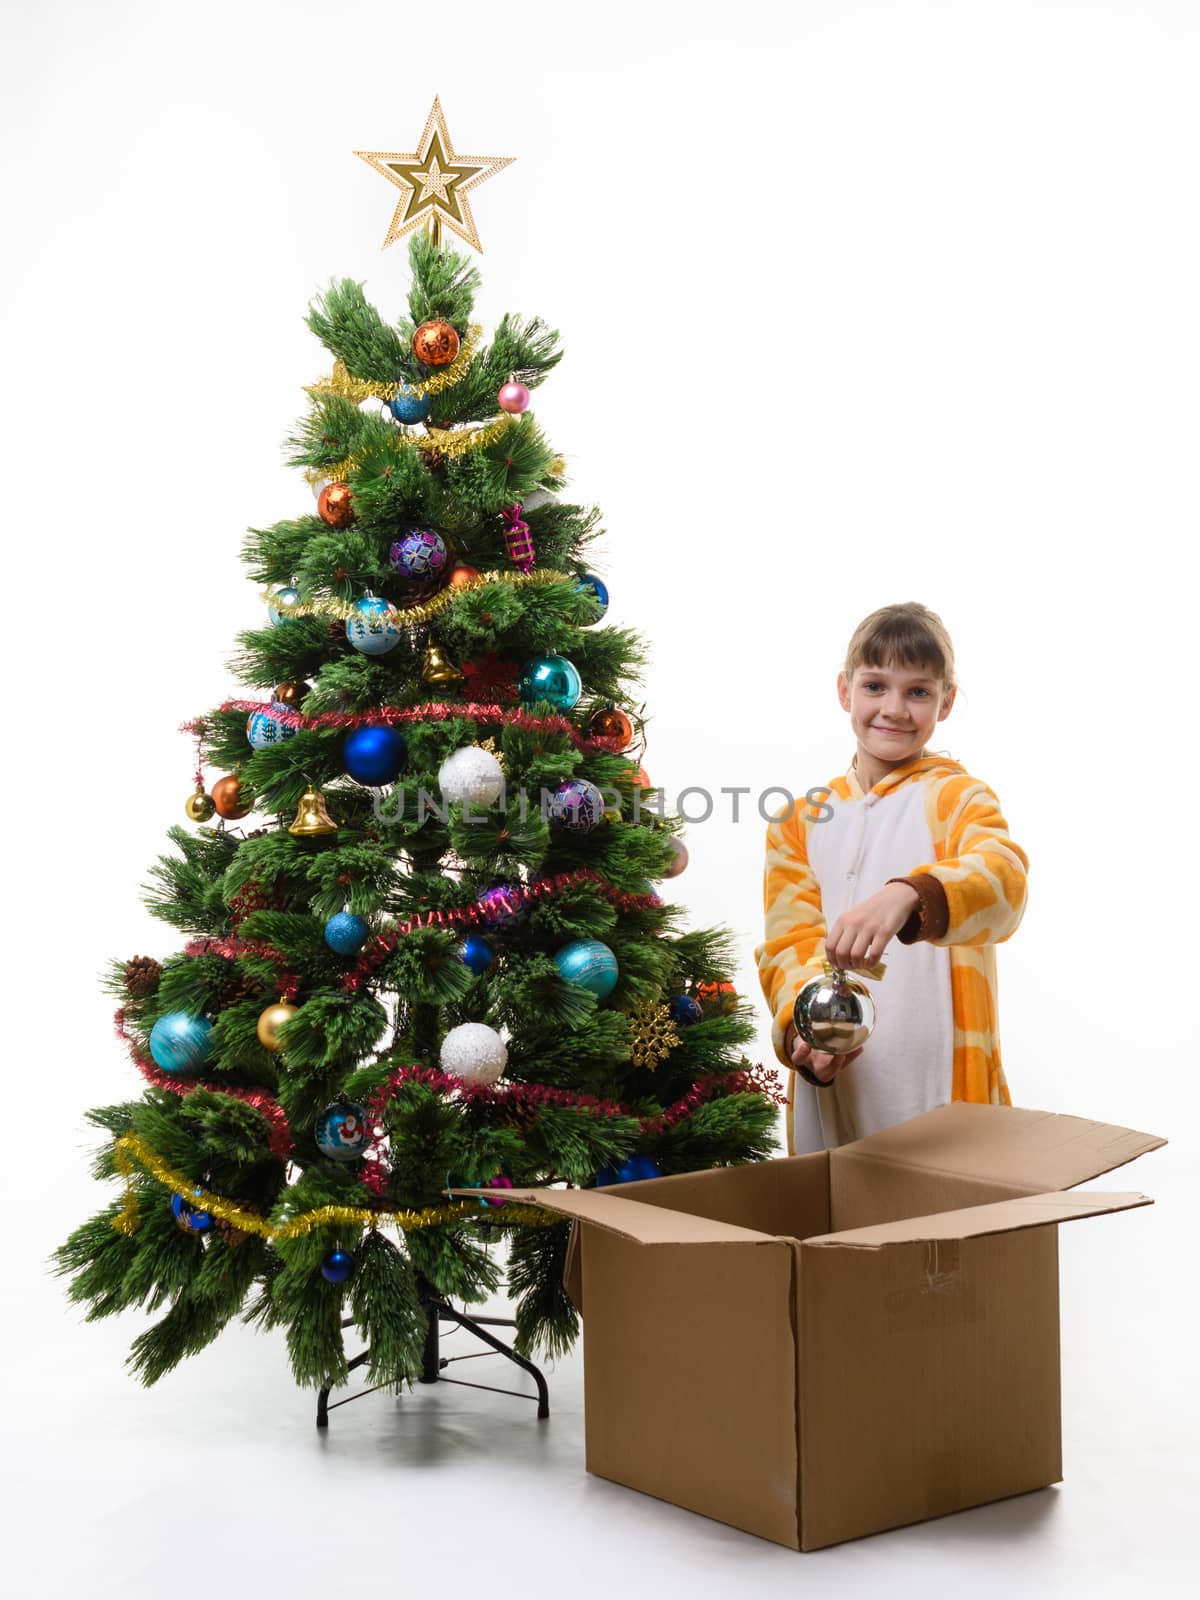 Girl removes Christmas balls from the Christmas tree and puts in a box